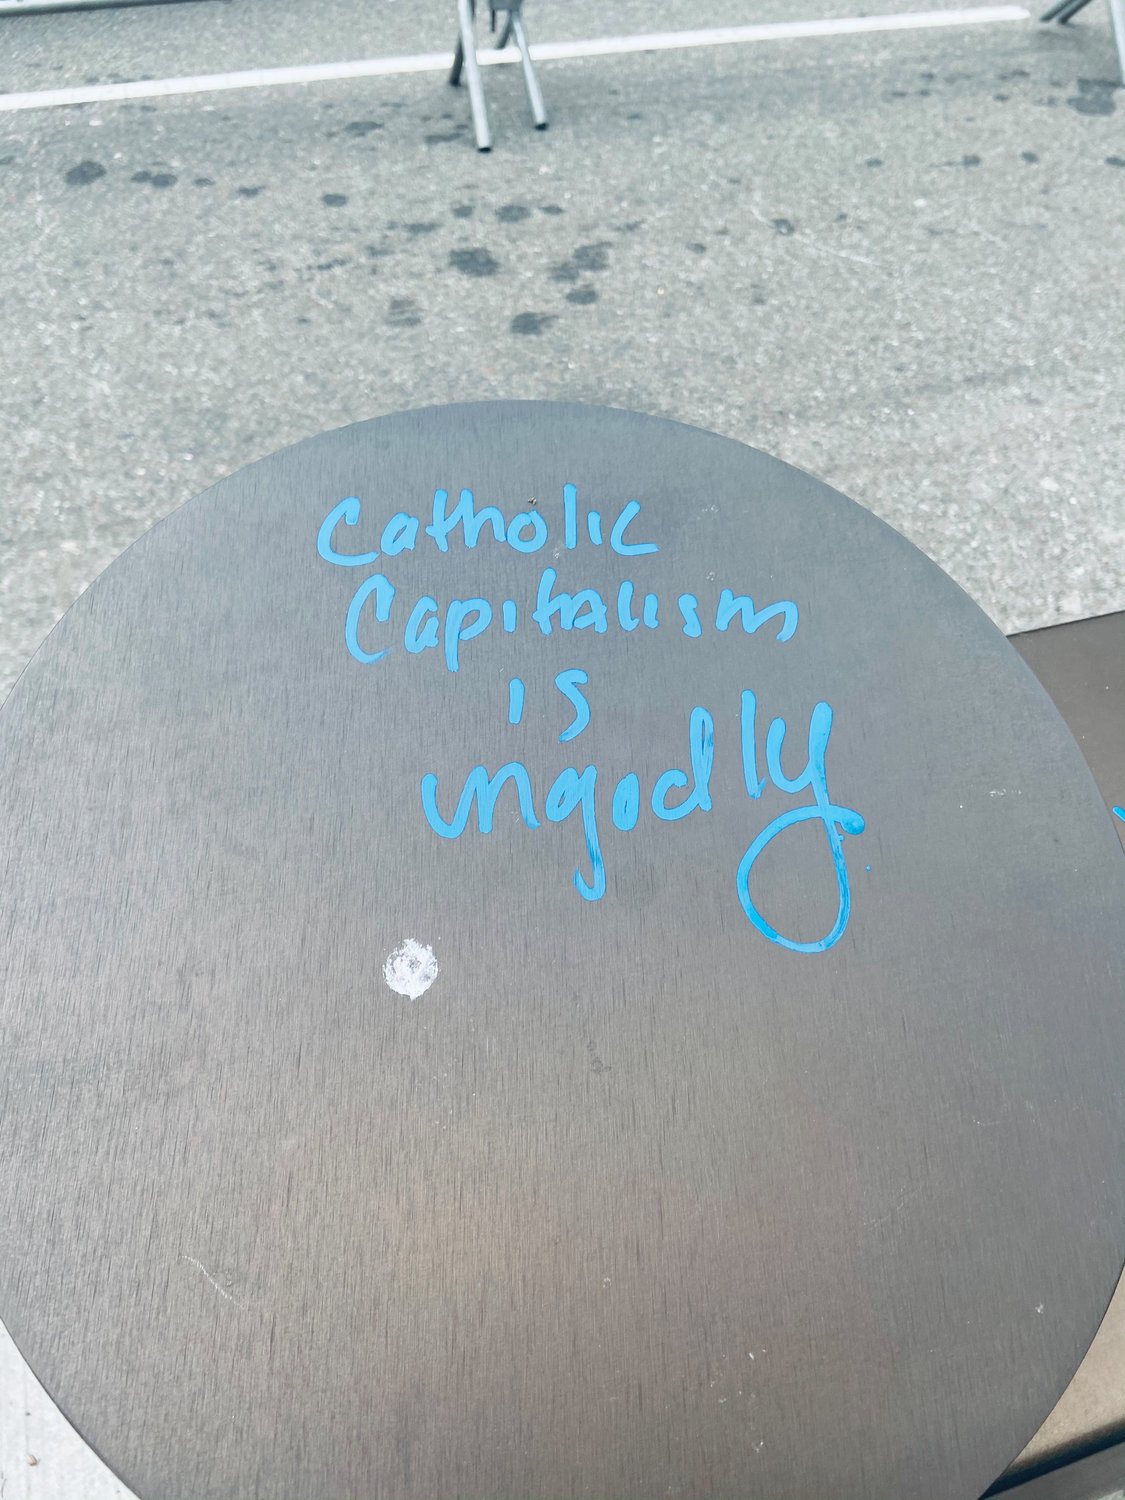 CATHEDRAL GRAFFITI—A bollard in front of St. Patrick’s Cathedral was marred by graffiti with an anti-Catholic tone in the early morning hours of Jan. 1.